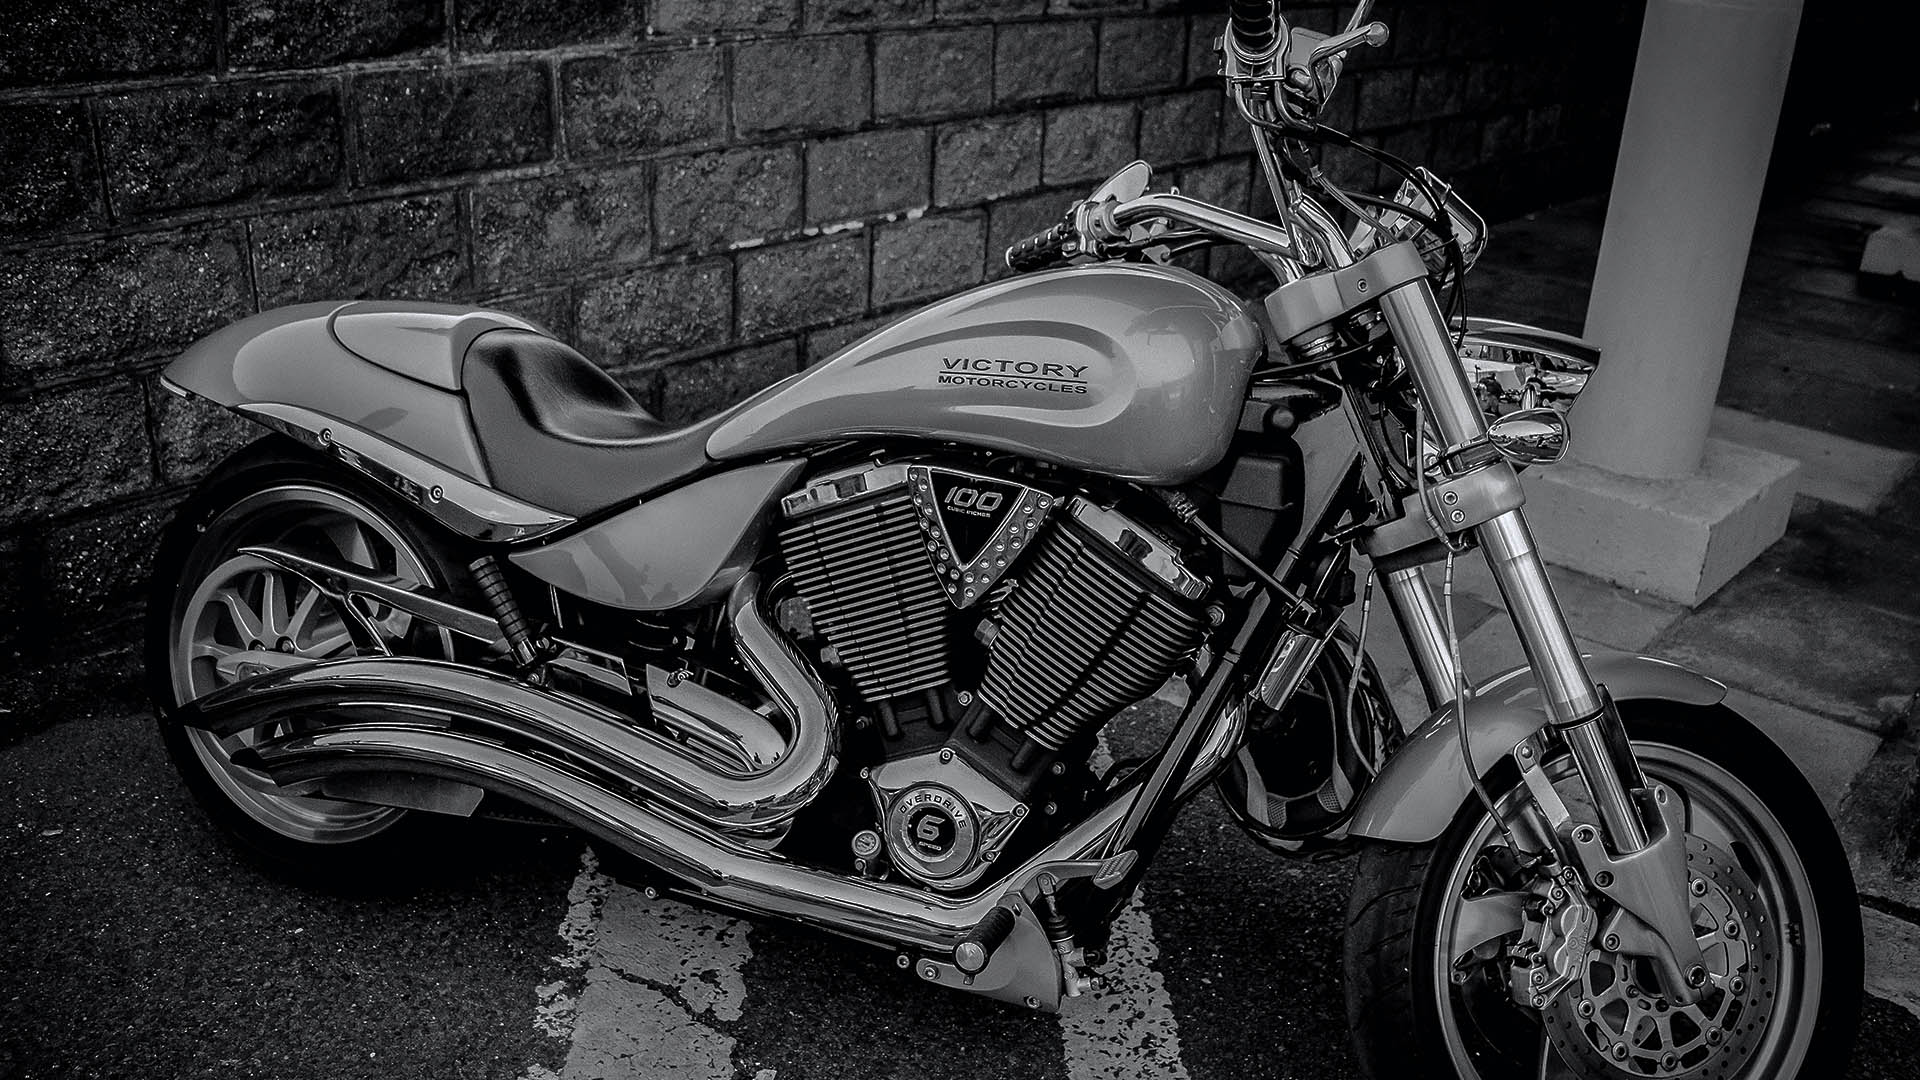 Victory motorcycle in black and white